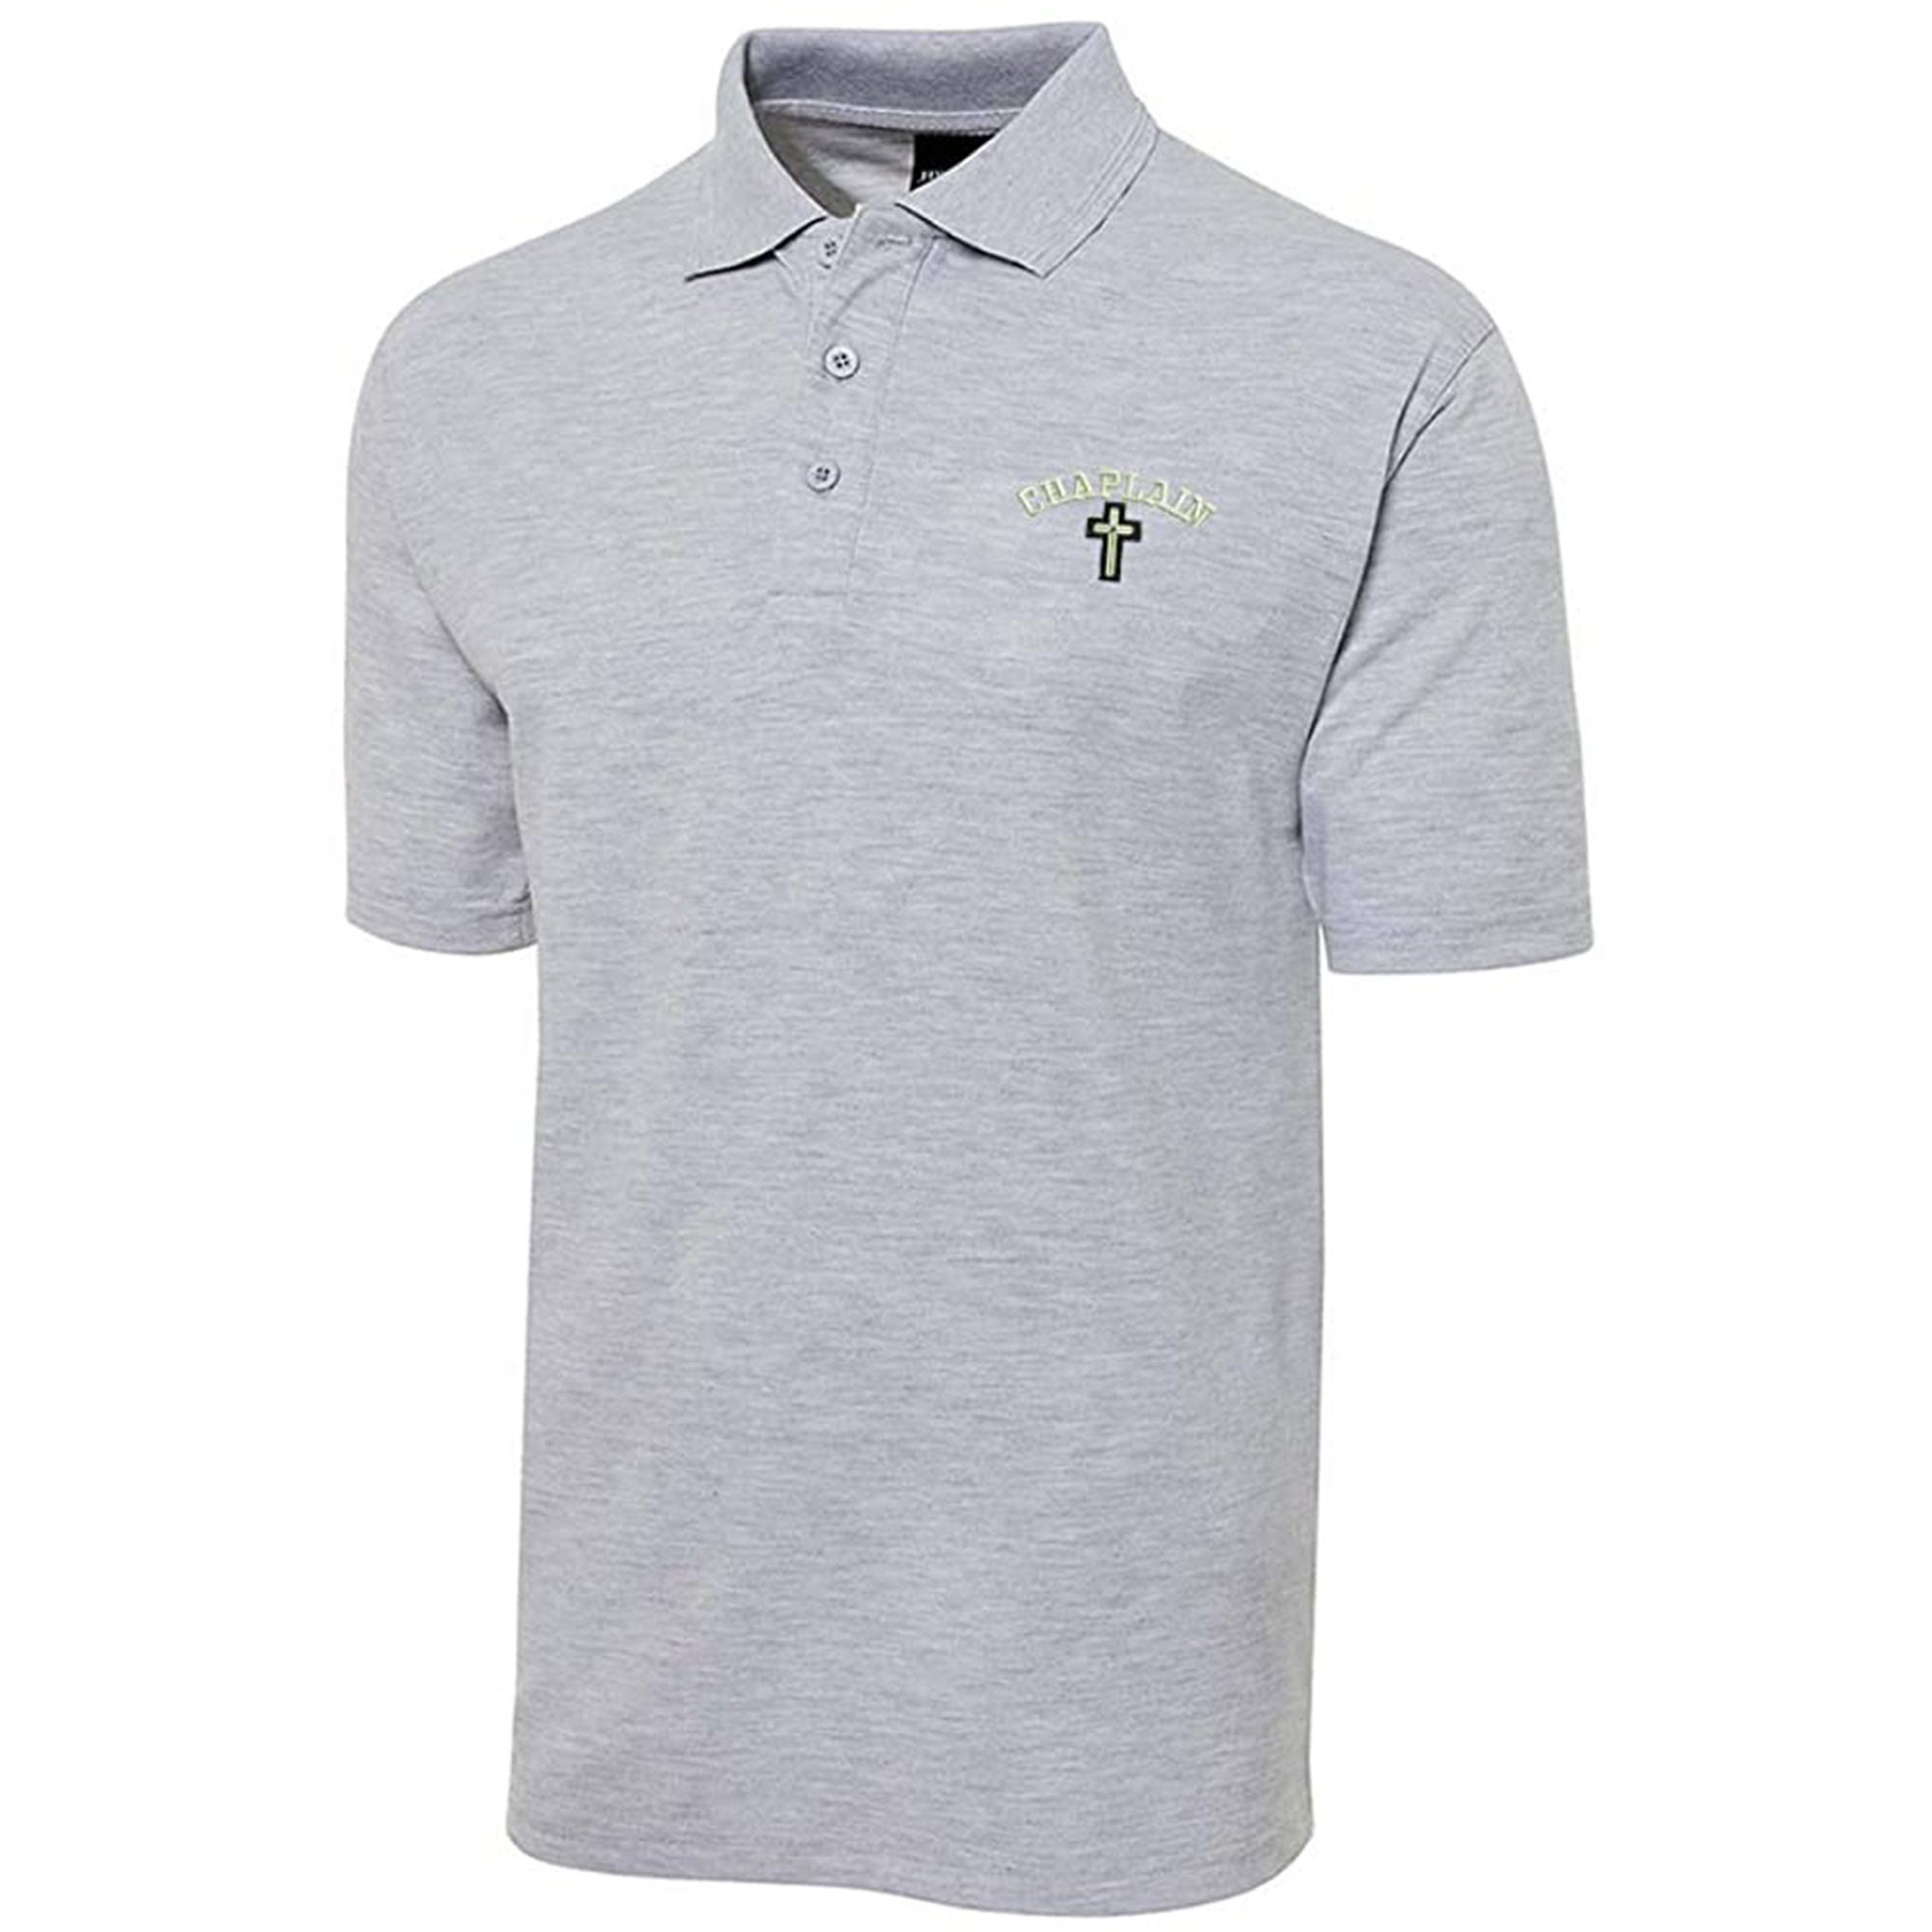 Discover Christain Chaplain Cross Embroidered Short Sleeve Polo Shirts Classic Embroidery Men's Polo Shirt